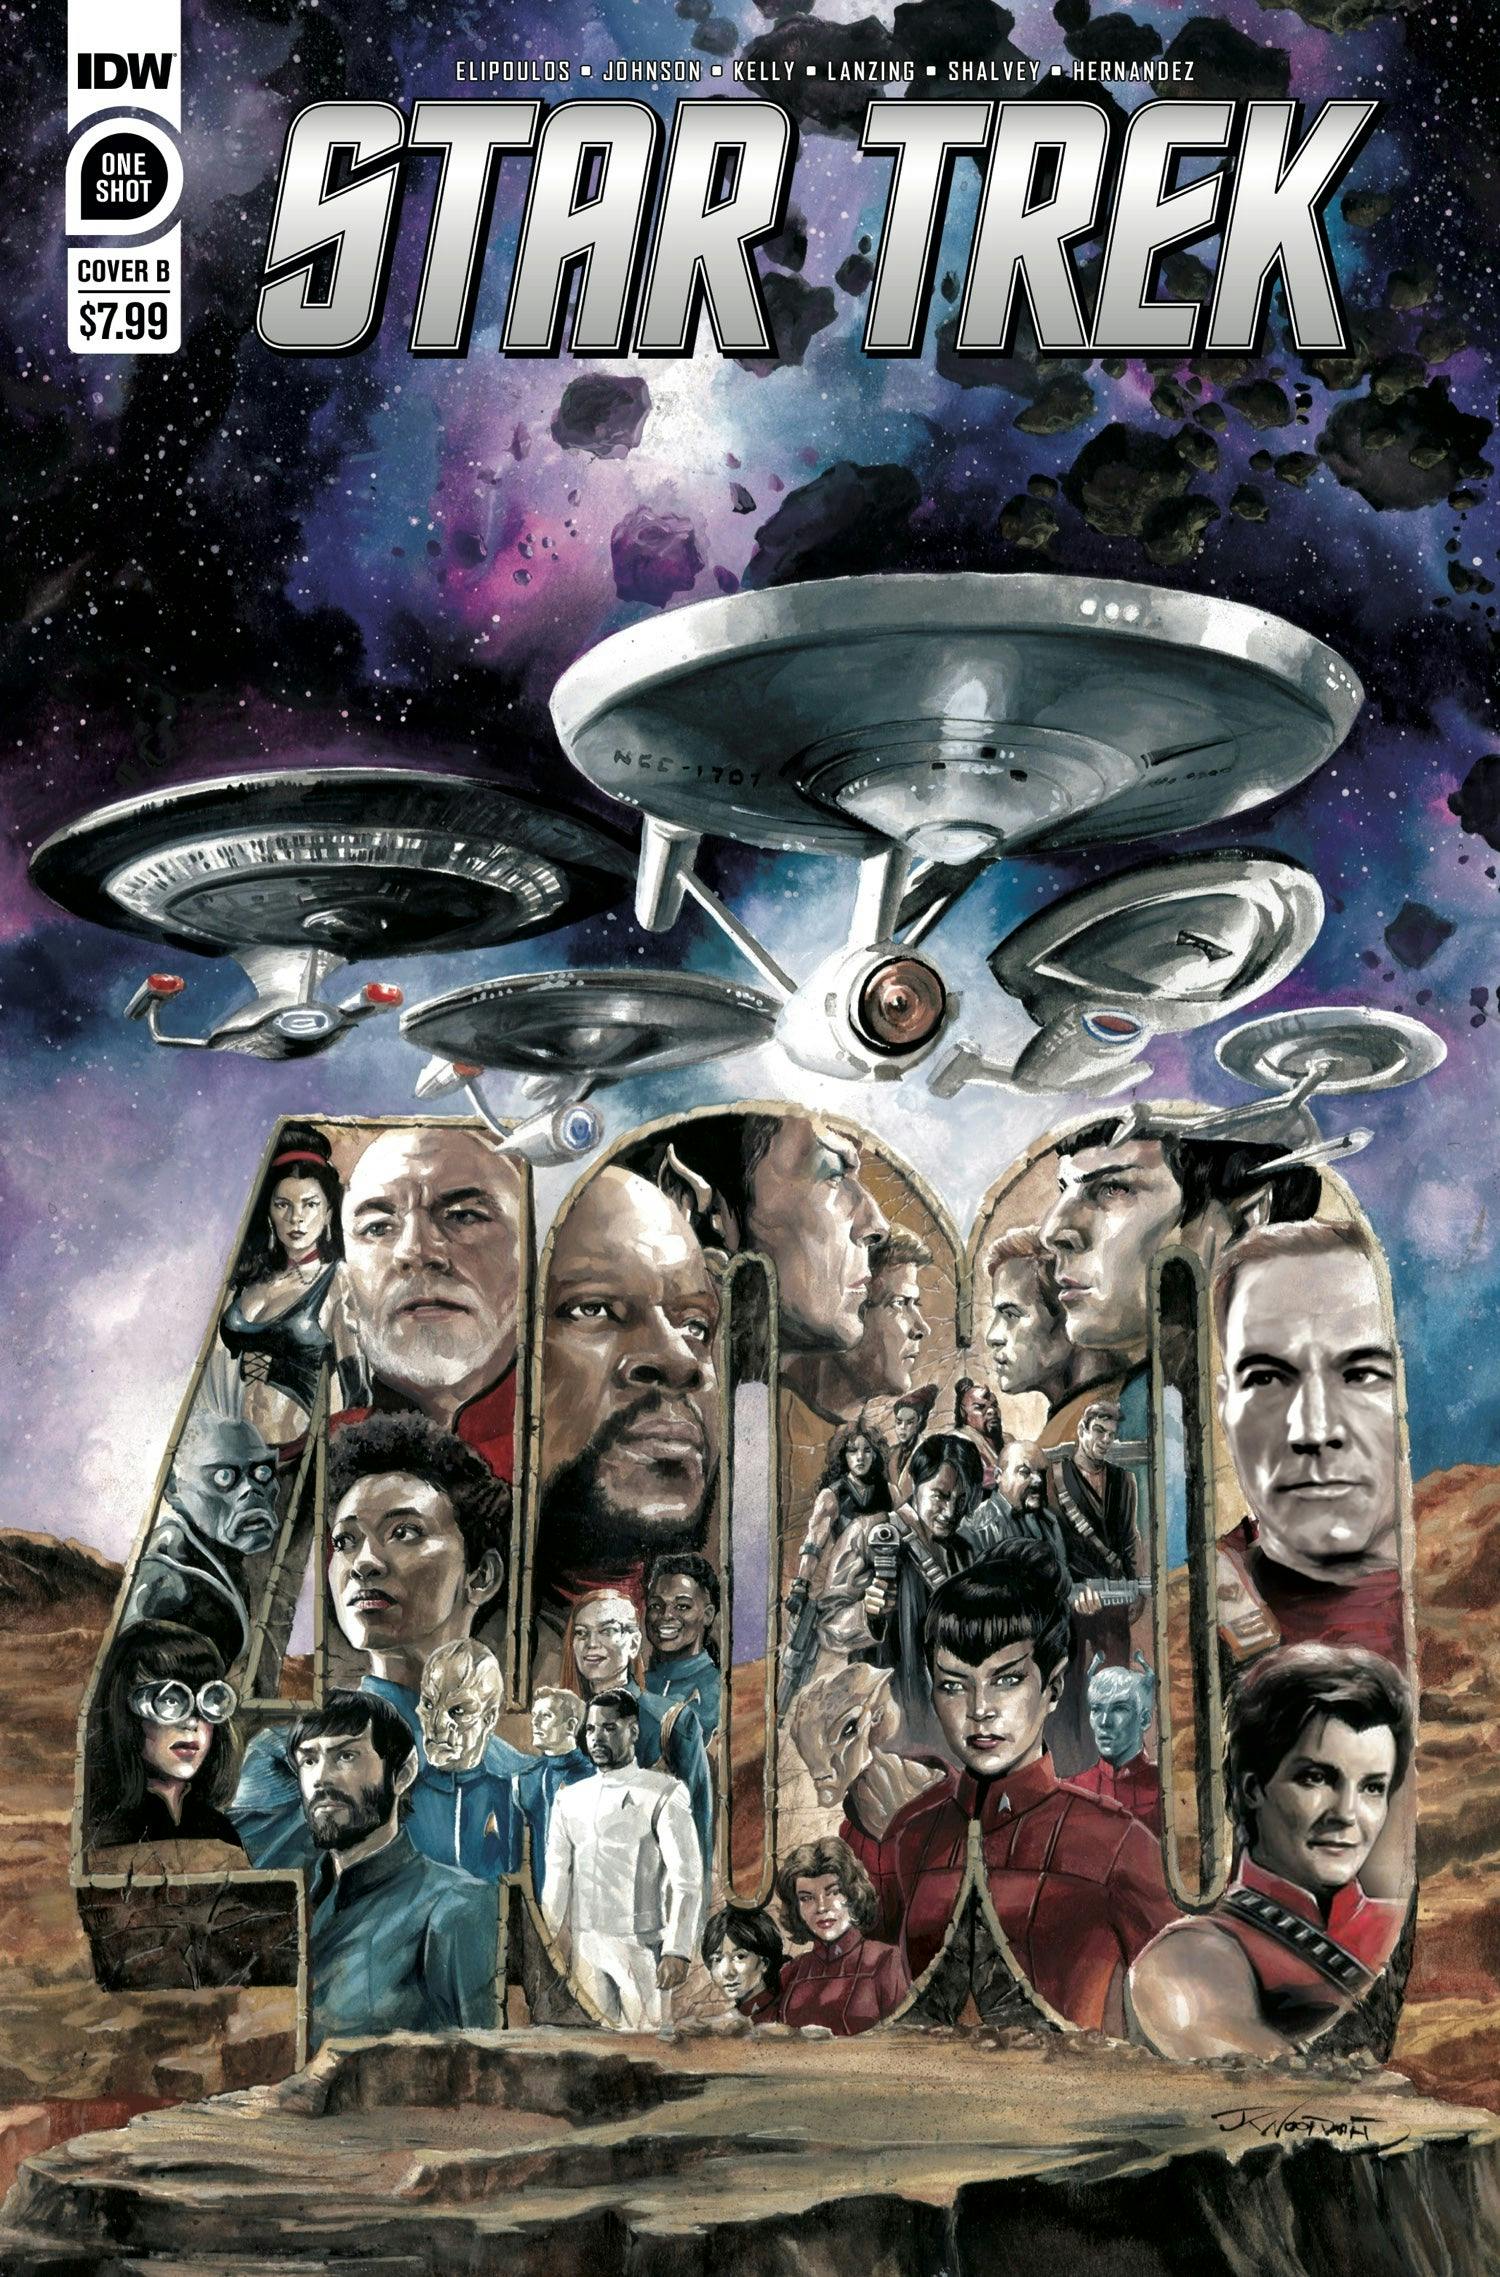 The B cover for Star Trek #400, featuring a collage of characters in the number 400.